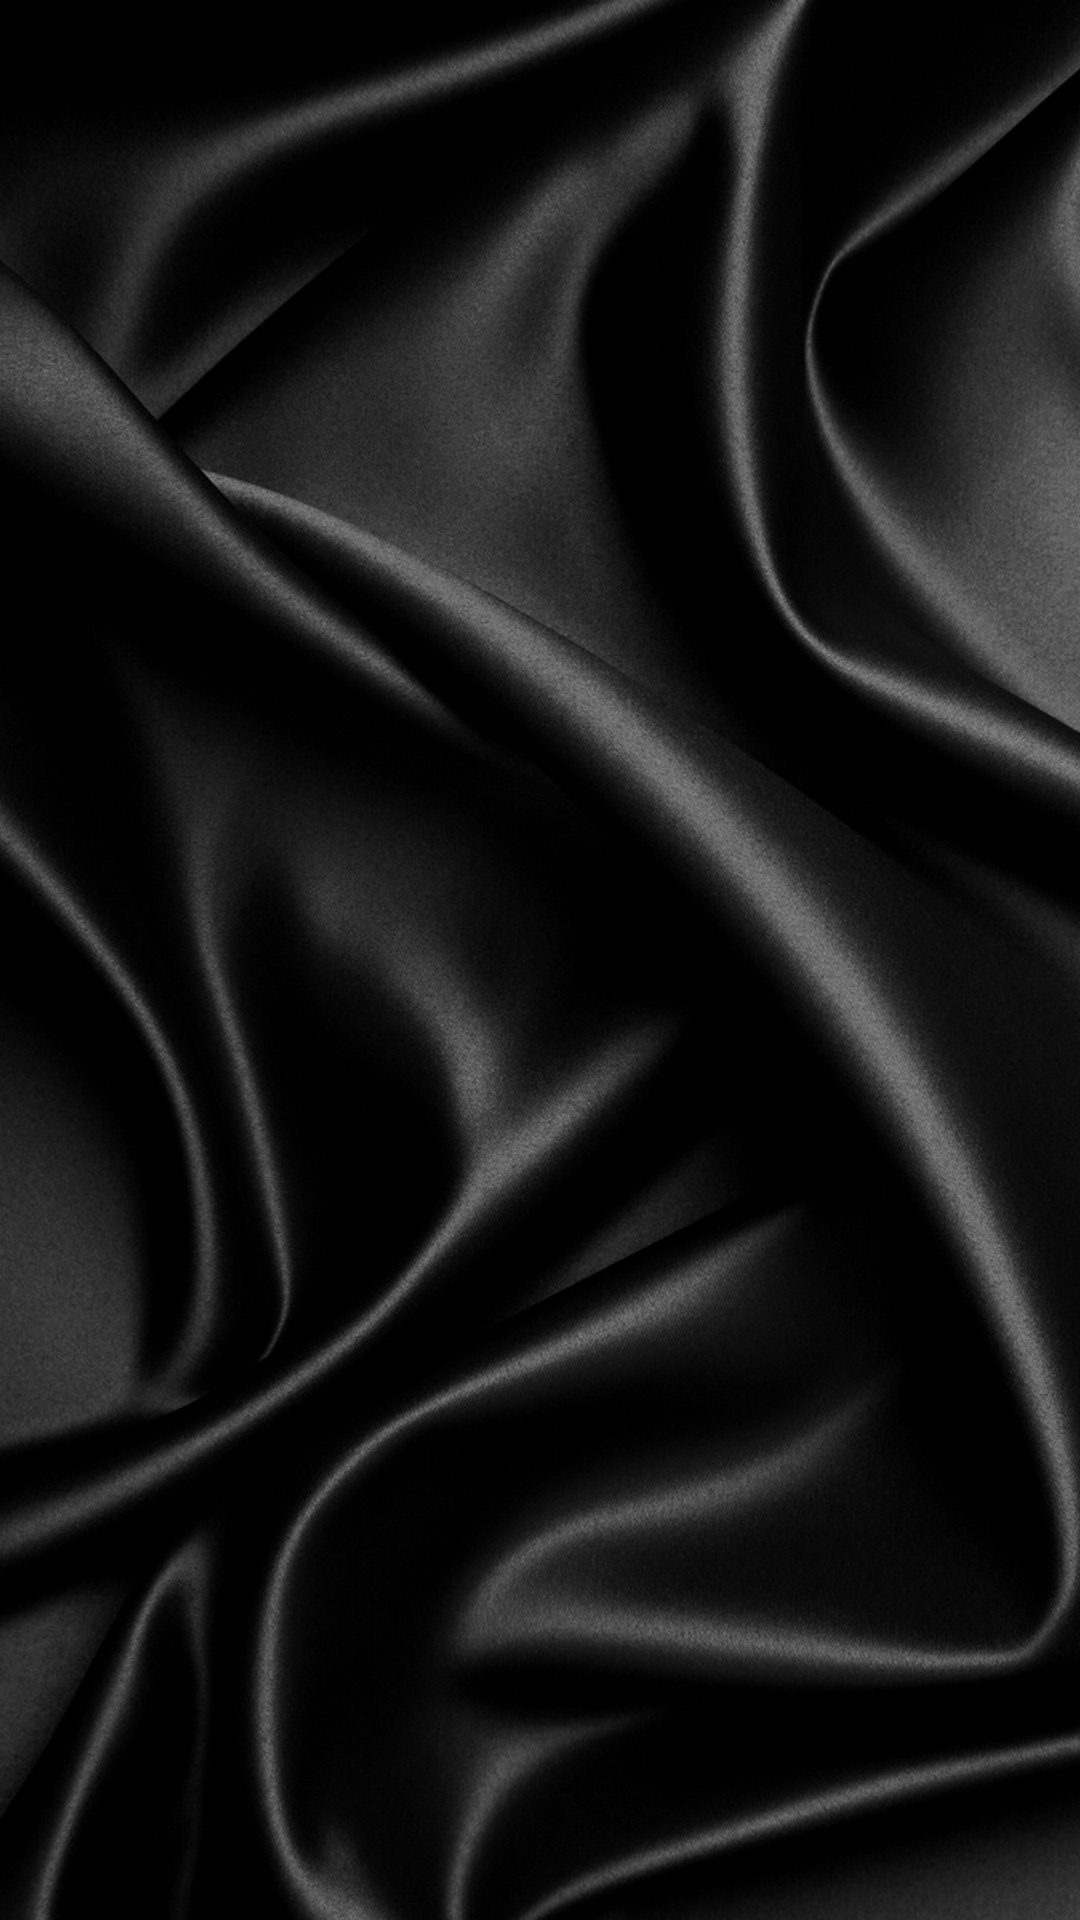 Black Silk iPhone Backgrounds With high-resolution 1920X1080 pixel. You can set as wallpaper for Apple iPhone X, XS Max, XR, 8, 7, 6, SE, iPad. Enjoy and share your favorite HD wallpapers and background images